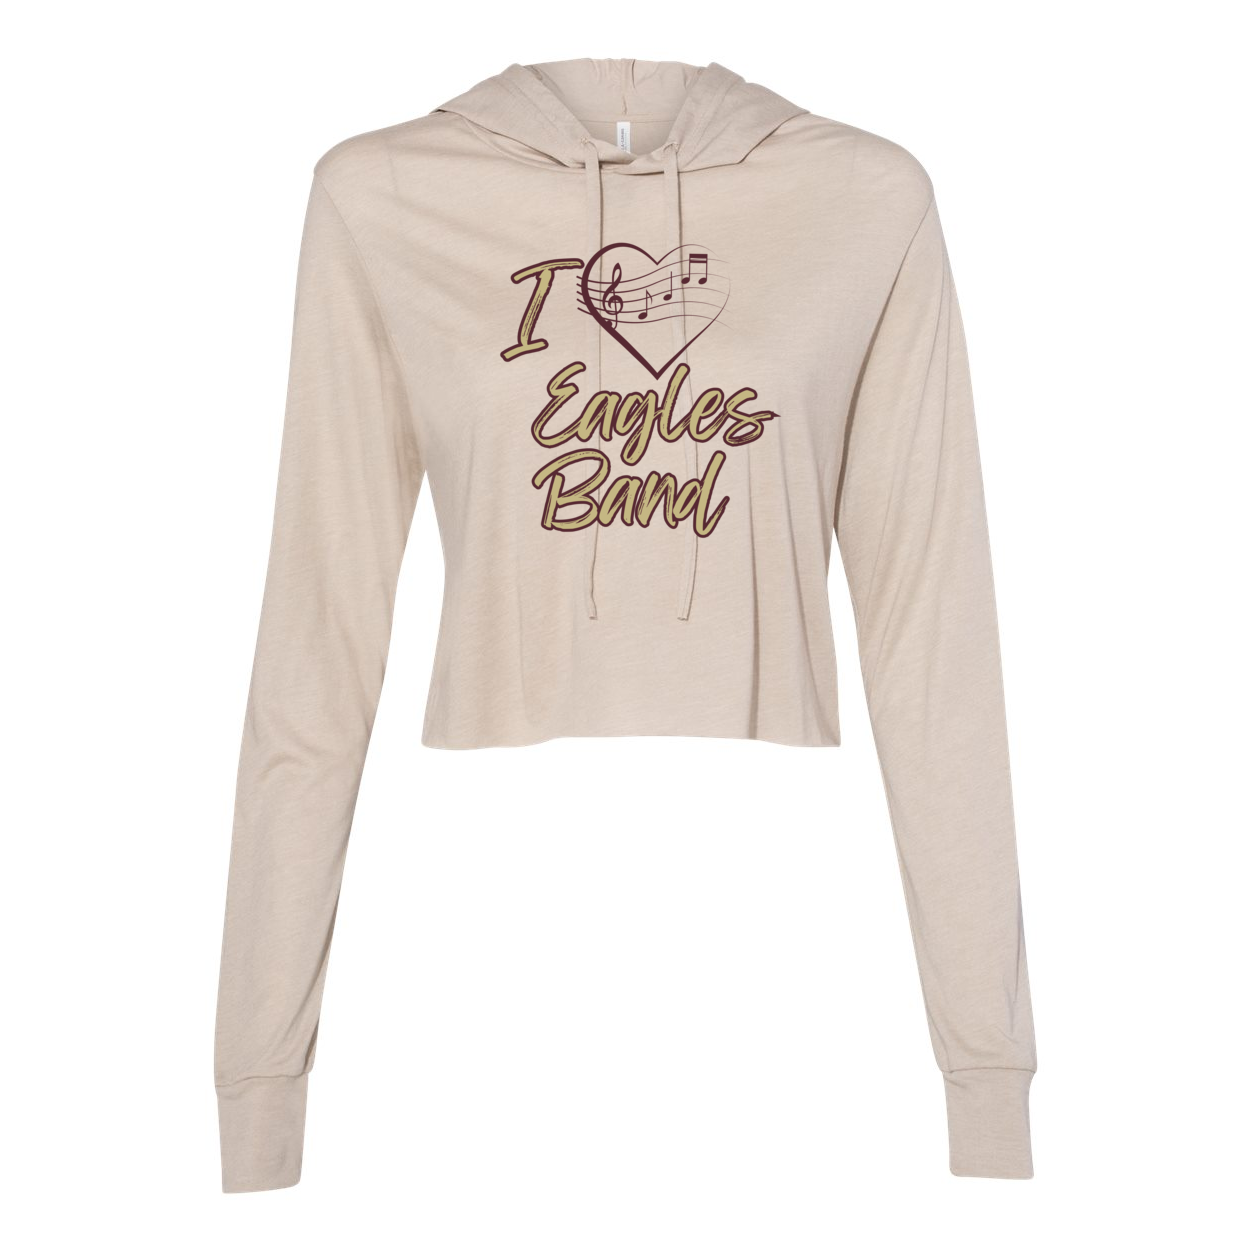 Women's Super Soft Band Heart Graphic Long Sleeve Cropped Hooded Tee - New Albany Eagles